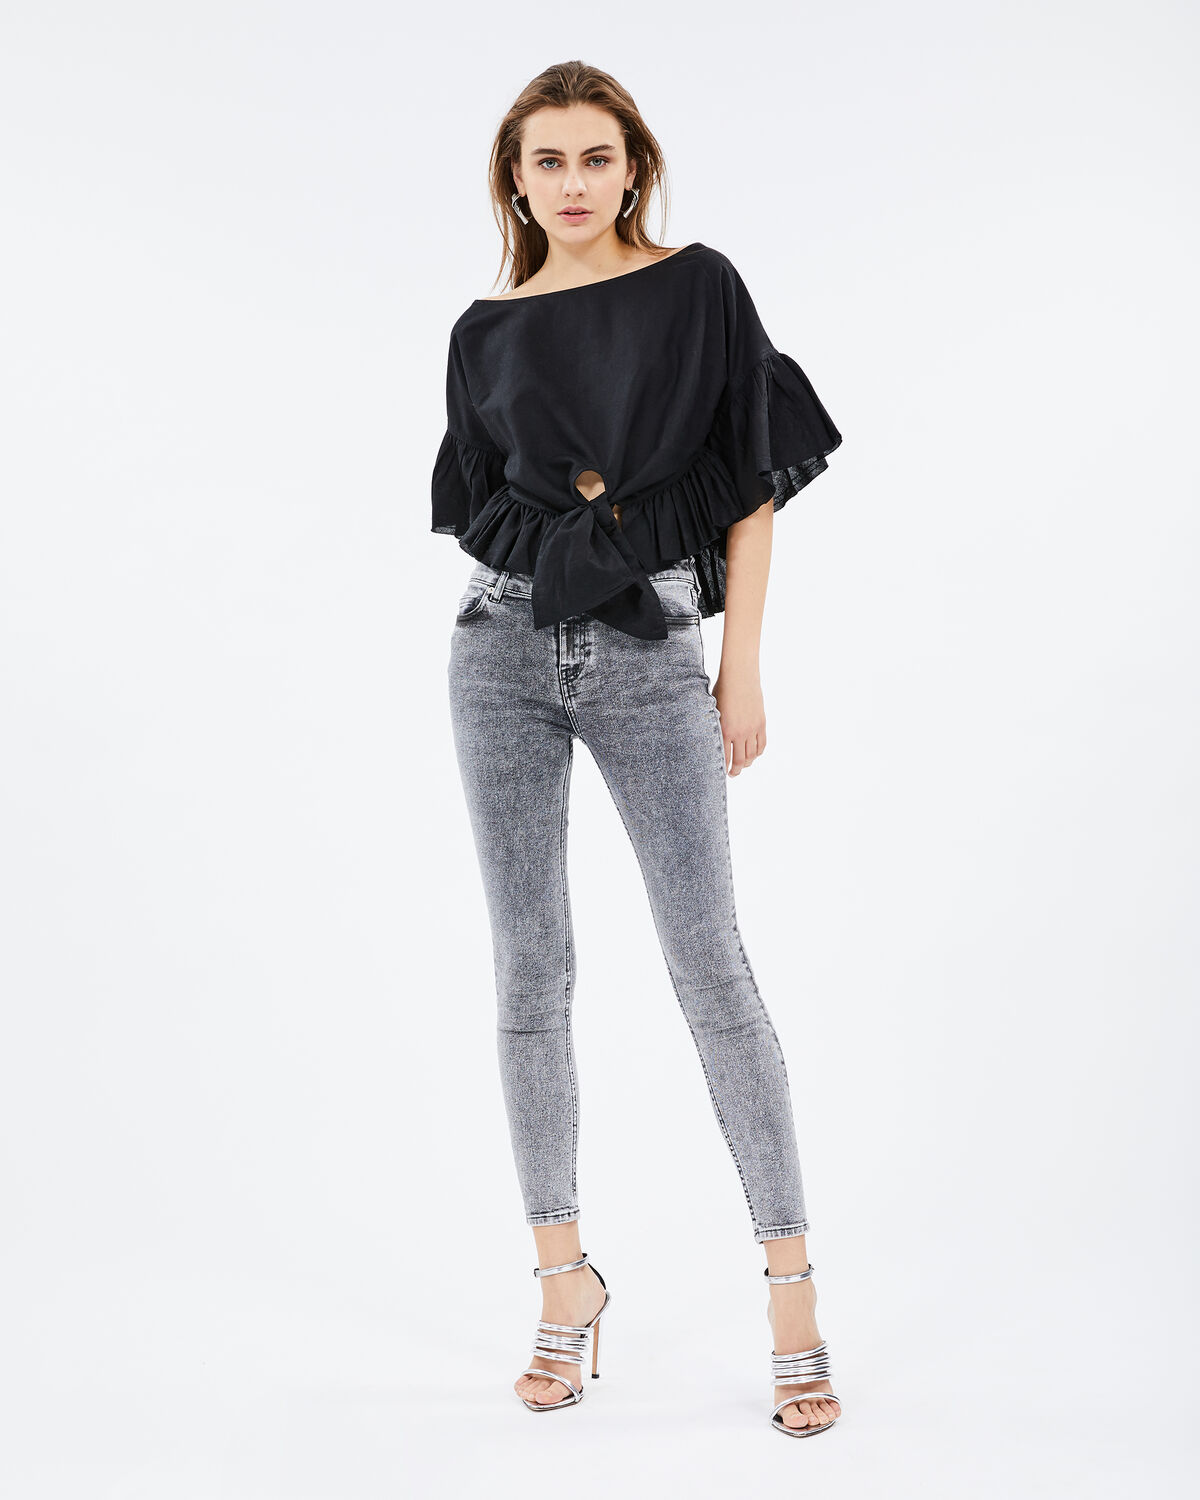 Photo of IRO Paris Linn Top Black - This Oversized Linen Top Is Distinguished By Its Drooping Shoulders, Wide Flared Sleeves And Multiple Flounces. Wear It With High Waist Pants For A Feminine And Modern Allure. Its Plus? Tie It At The Waist To Mark Your Silhouette. Spring Summer 19